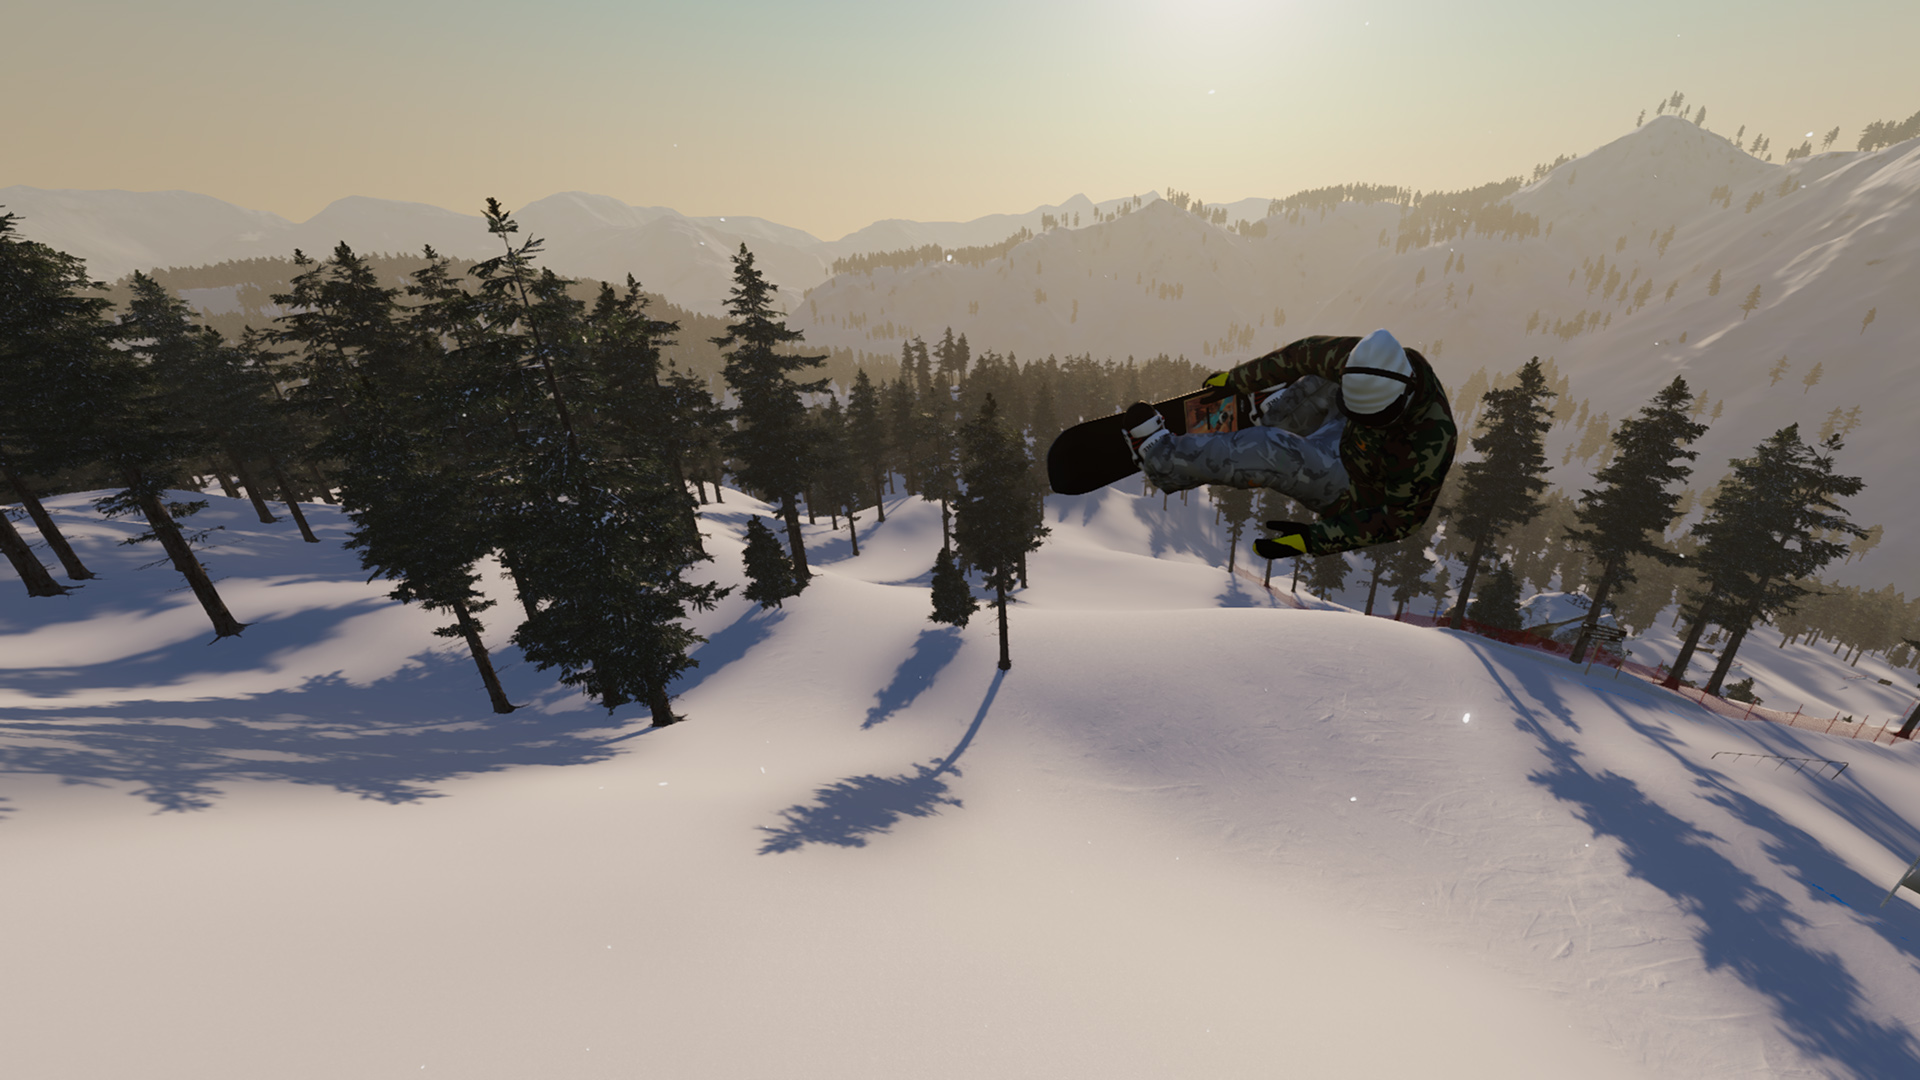 The Snowboard Game on Steam